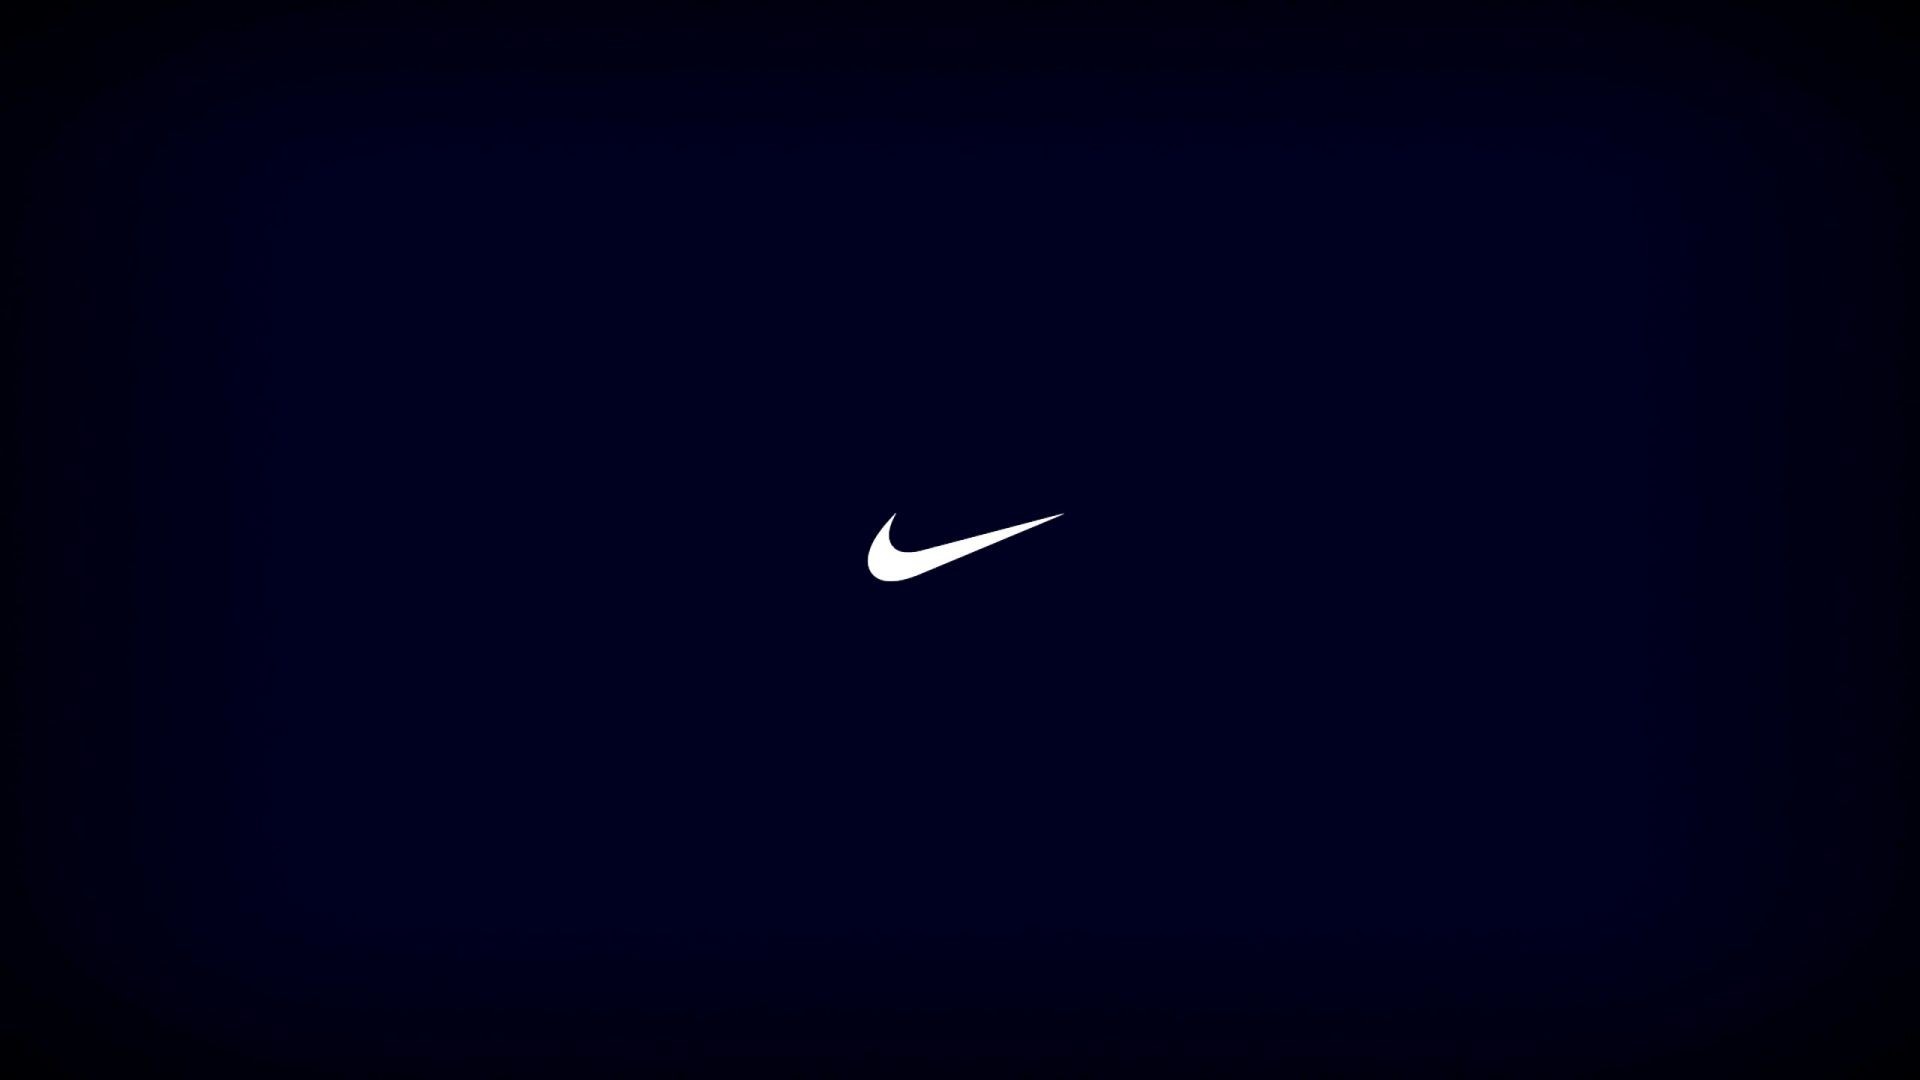 Nike wallpaper ·① Download free awesome backgrounds for ...